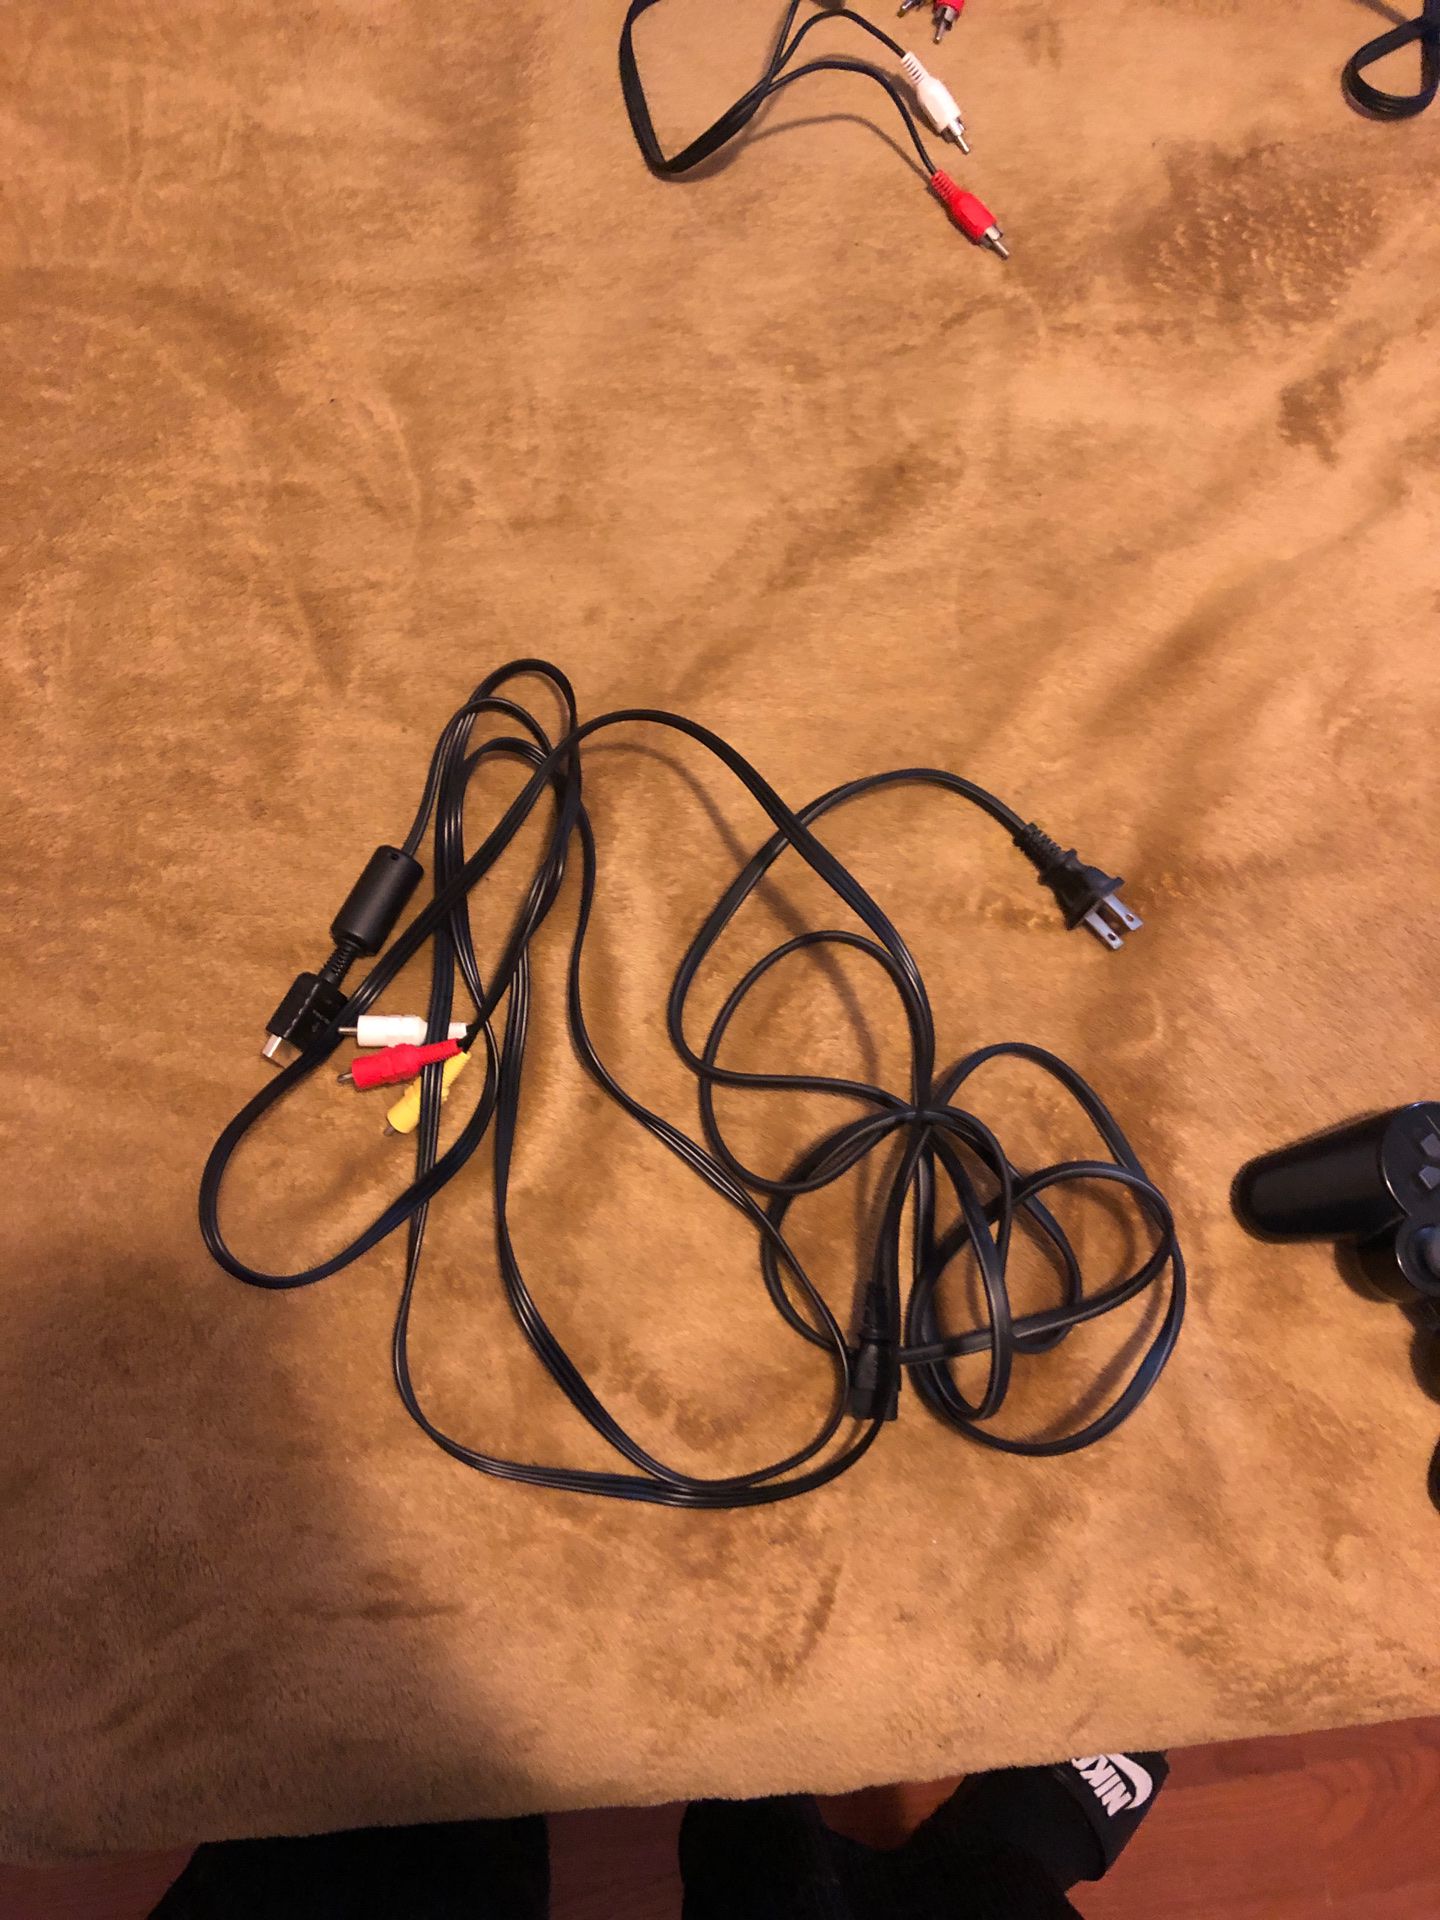 Ps2 cables